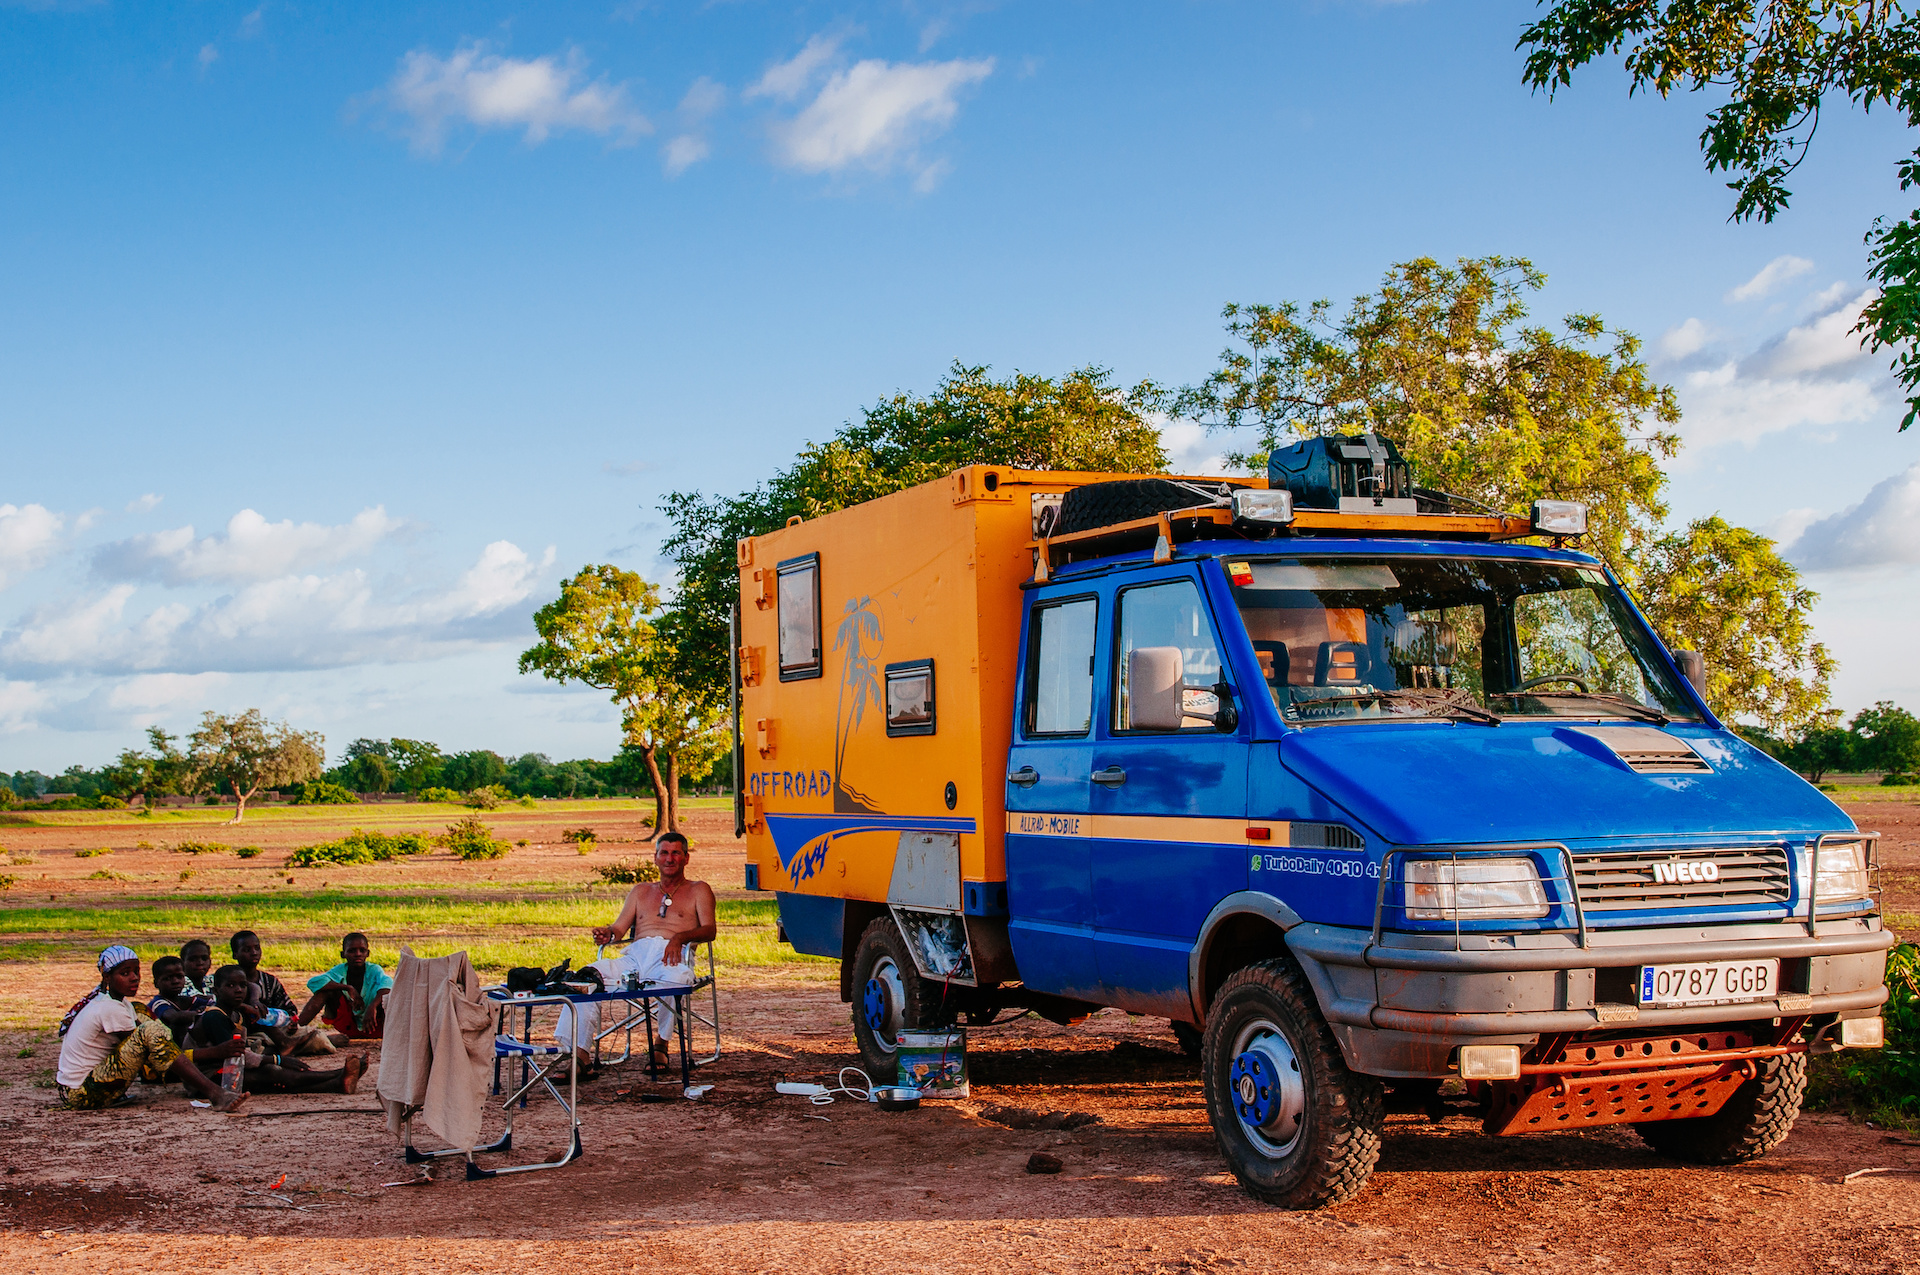 An image of an overlanding rig parked outdoors.